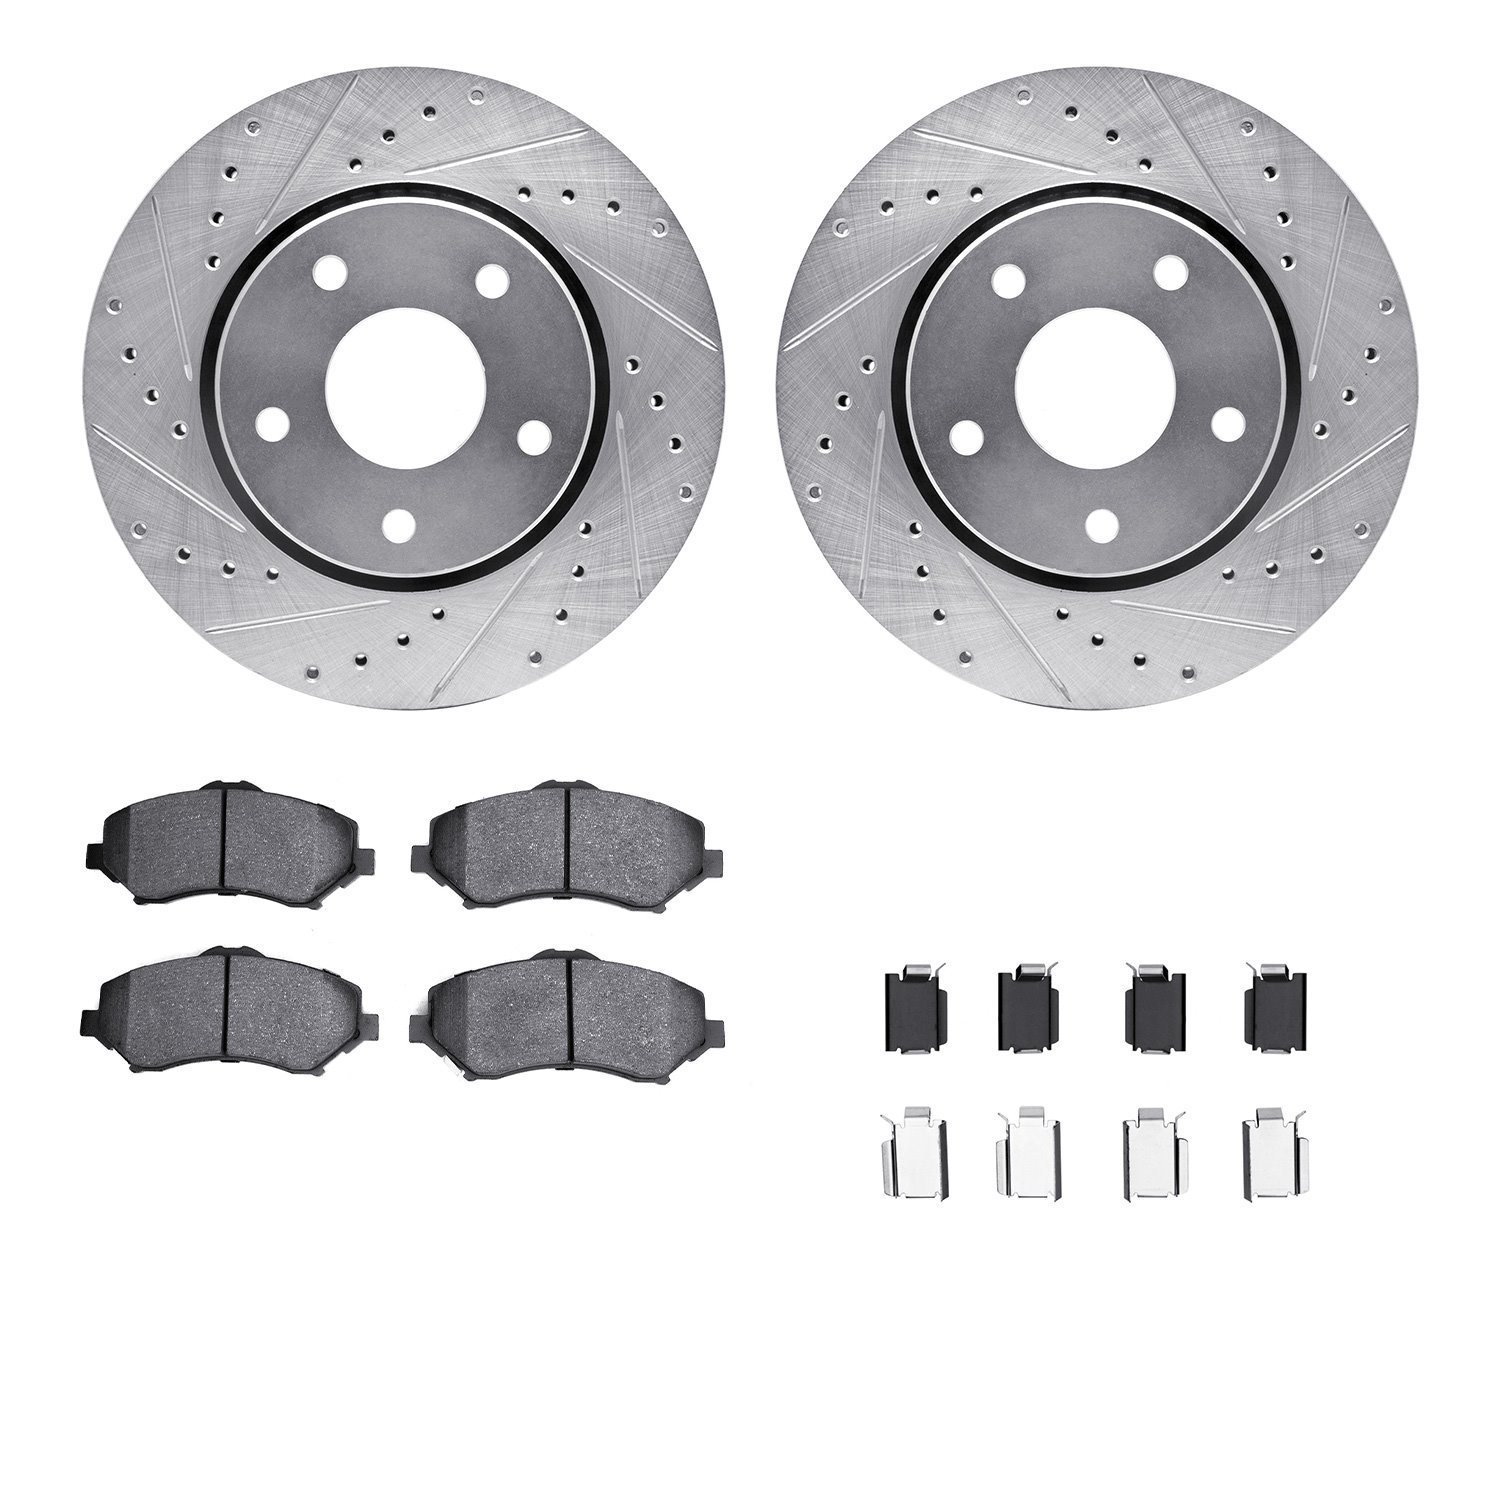 7412-40020 Drilled/Slotted Brake Rotors with Ultimate-Duty Brake Pads Kit & Hardware [Silver], 2008-2016 Multiple Makes/Models,